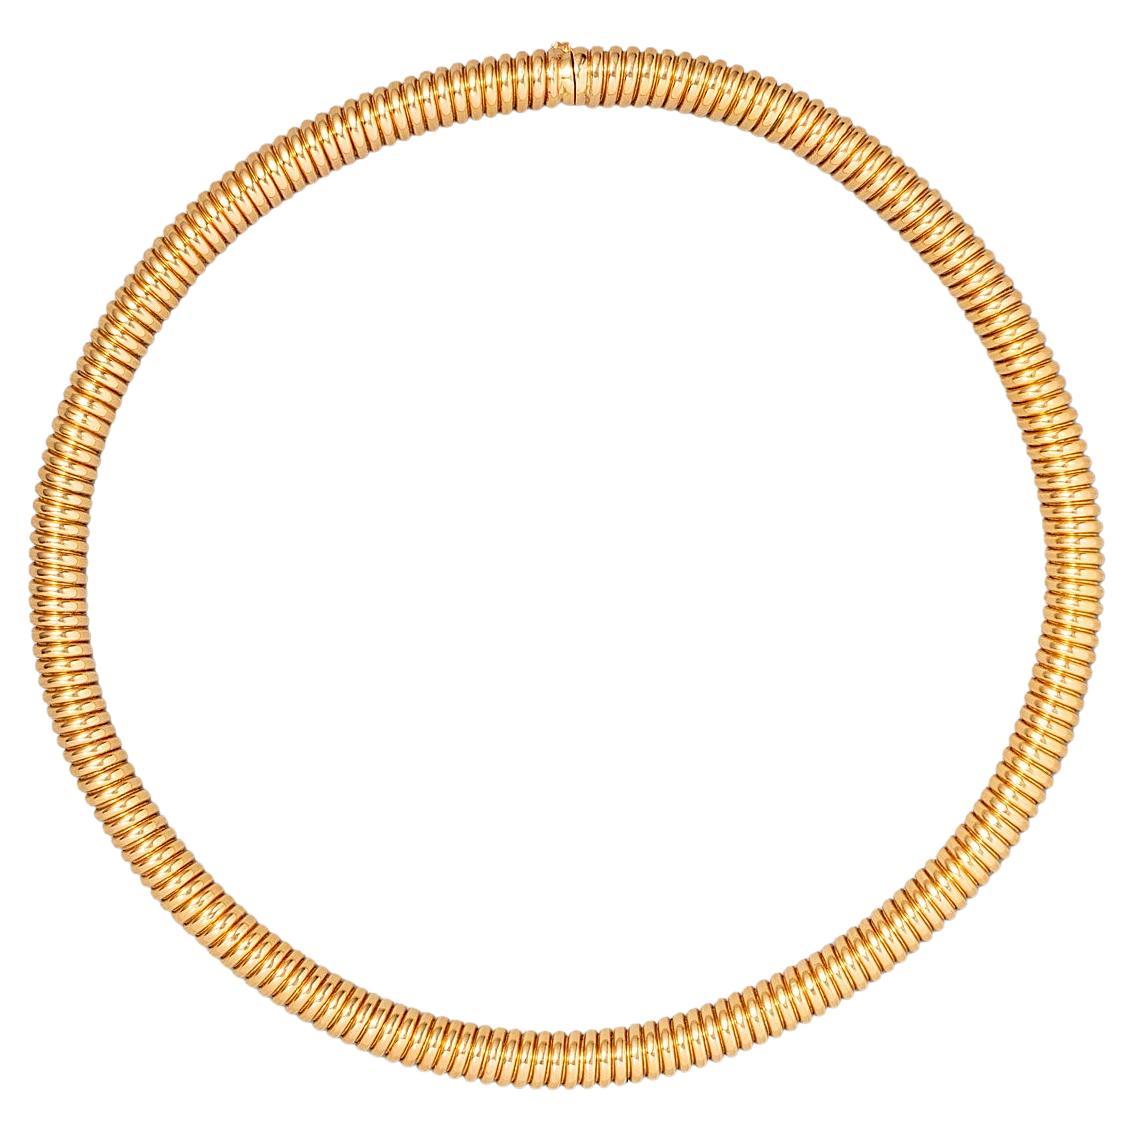 An 18 Carat Gold Tubogas Weingrill Necklace